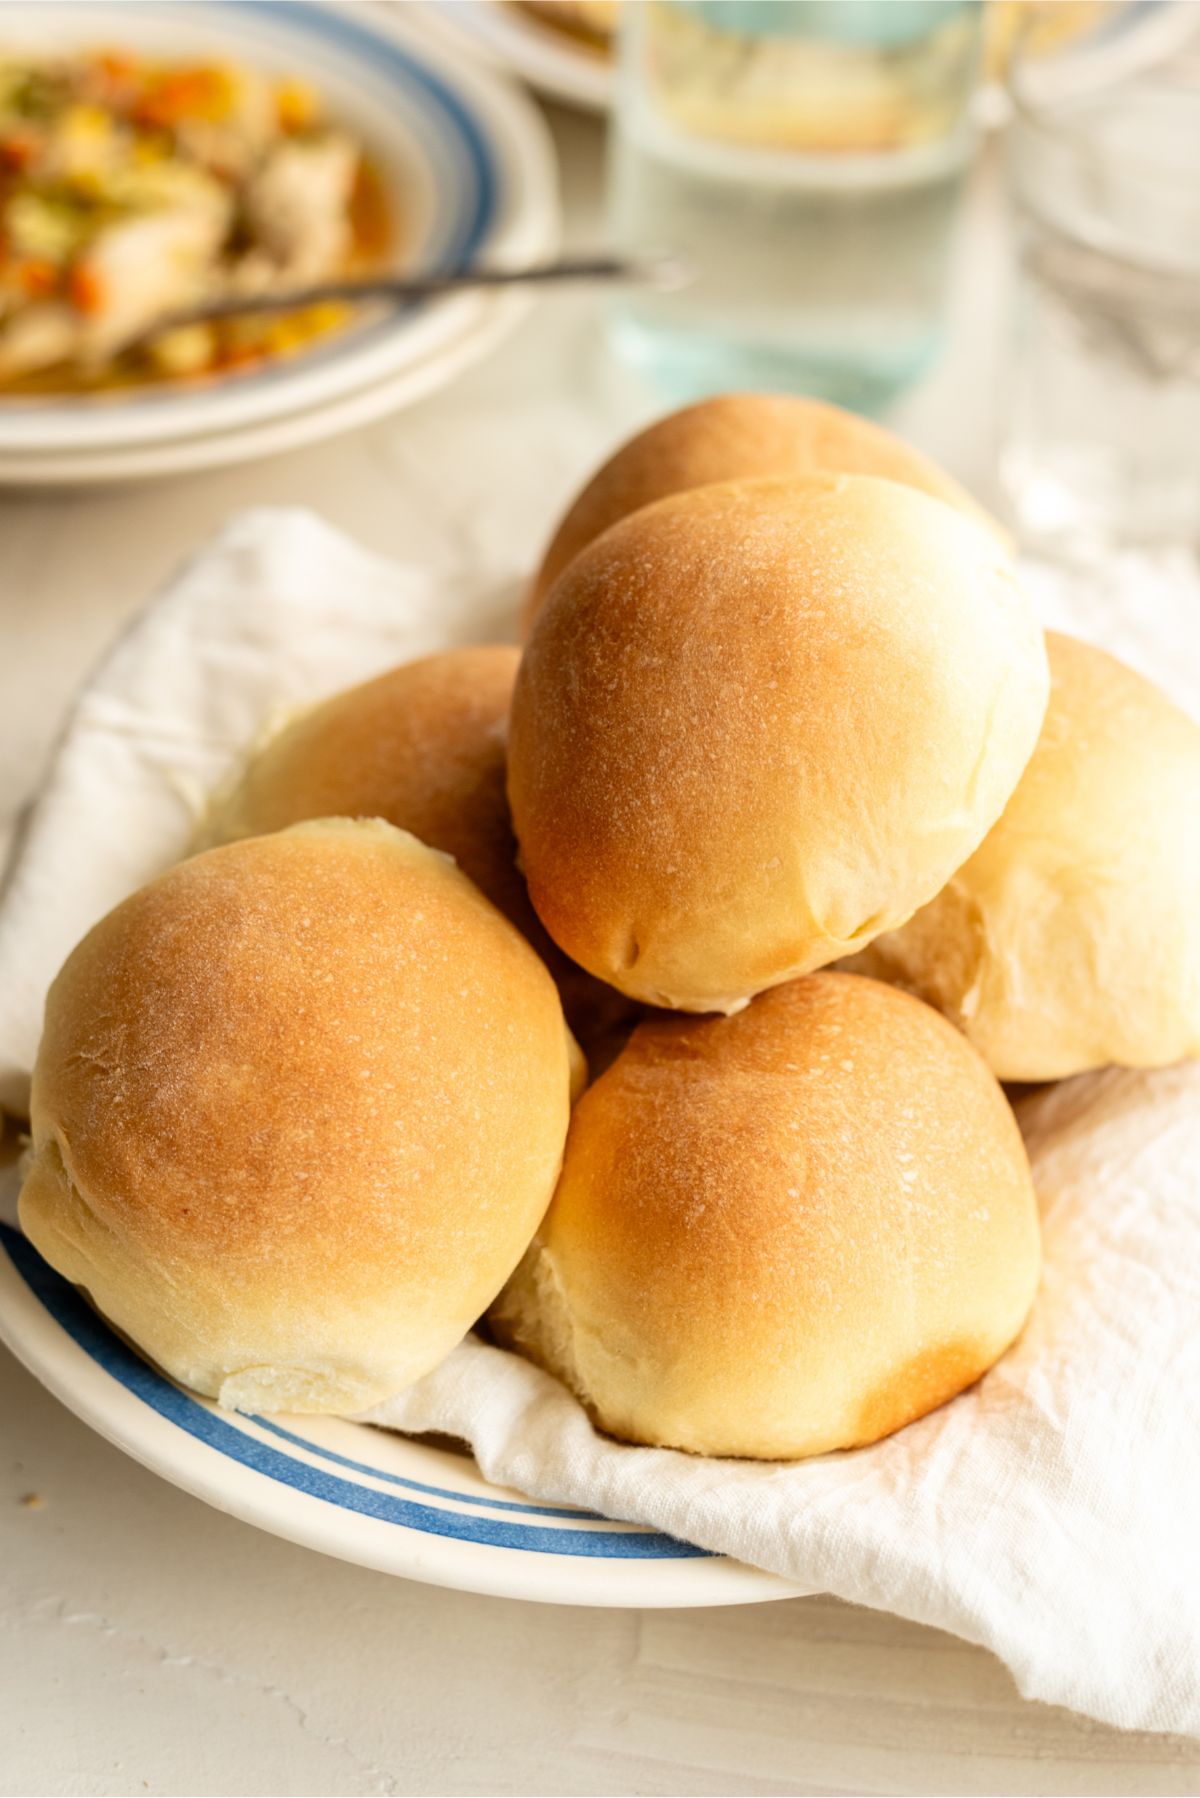 A plate of Parkerhouse Rolls freshly baked